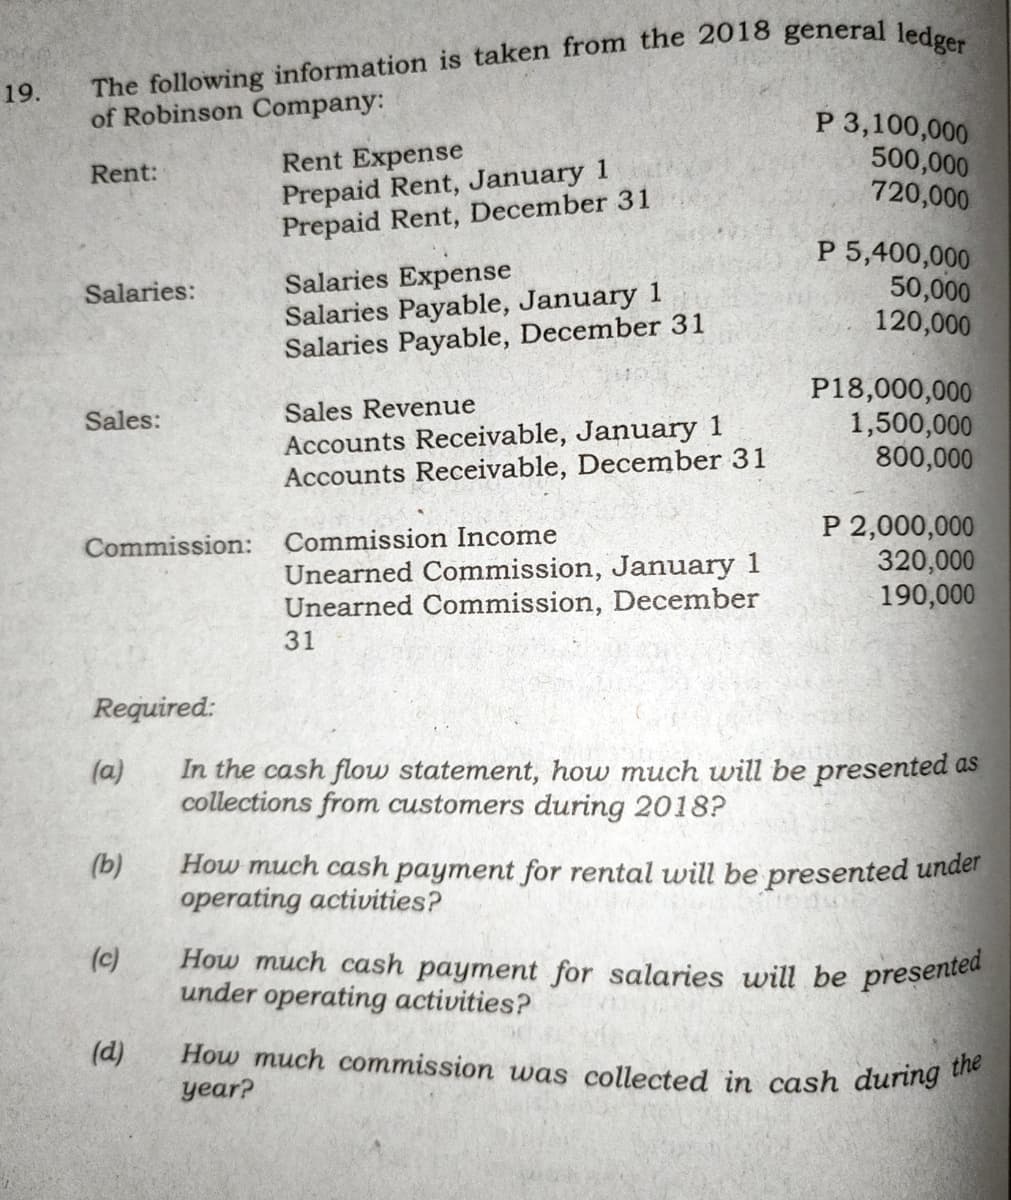 How much commission wwas collected in cash during the
How much cash payment for salaries will be presented
19.
of Robinson Company:
Rent Expense
Prepaid Rent, January 1
Prepaid Rent, December 31
P 3,100,000
500,000
720,000
Rent:
Salaries Expense
Salaries Payable, January 1
Salaries Payable, December 31
P 5,400,000
50,000
120,000
Salaries:
Sales Revenue
Accounts Receivable, January 1
Accounts Receivable, December 31
P18,000,000
1,500,000
800,000
Sales:
Commission Income
Unearned Commission, January 1
Unearned Commission, December
31
P 2,000,000
320,000
190,000
Commission:
Required:
In the cash flow statement, how much will be presented as
collections from customers during 2018?
(a)
How much cash payment for rental will be presented unaer
operating activities?
(b)
(c)
under operating activities?
(d)
year?
